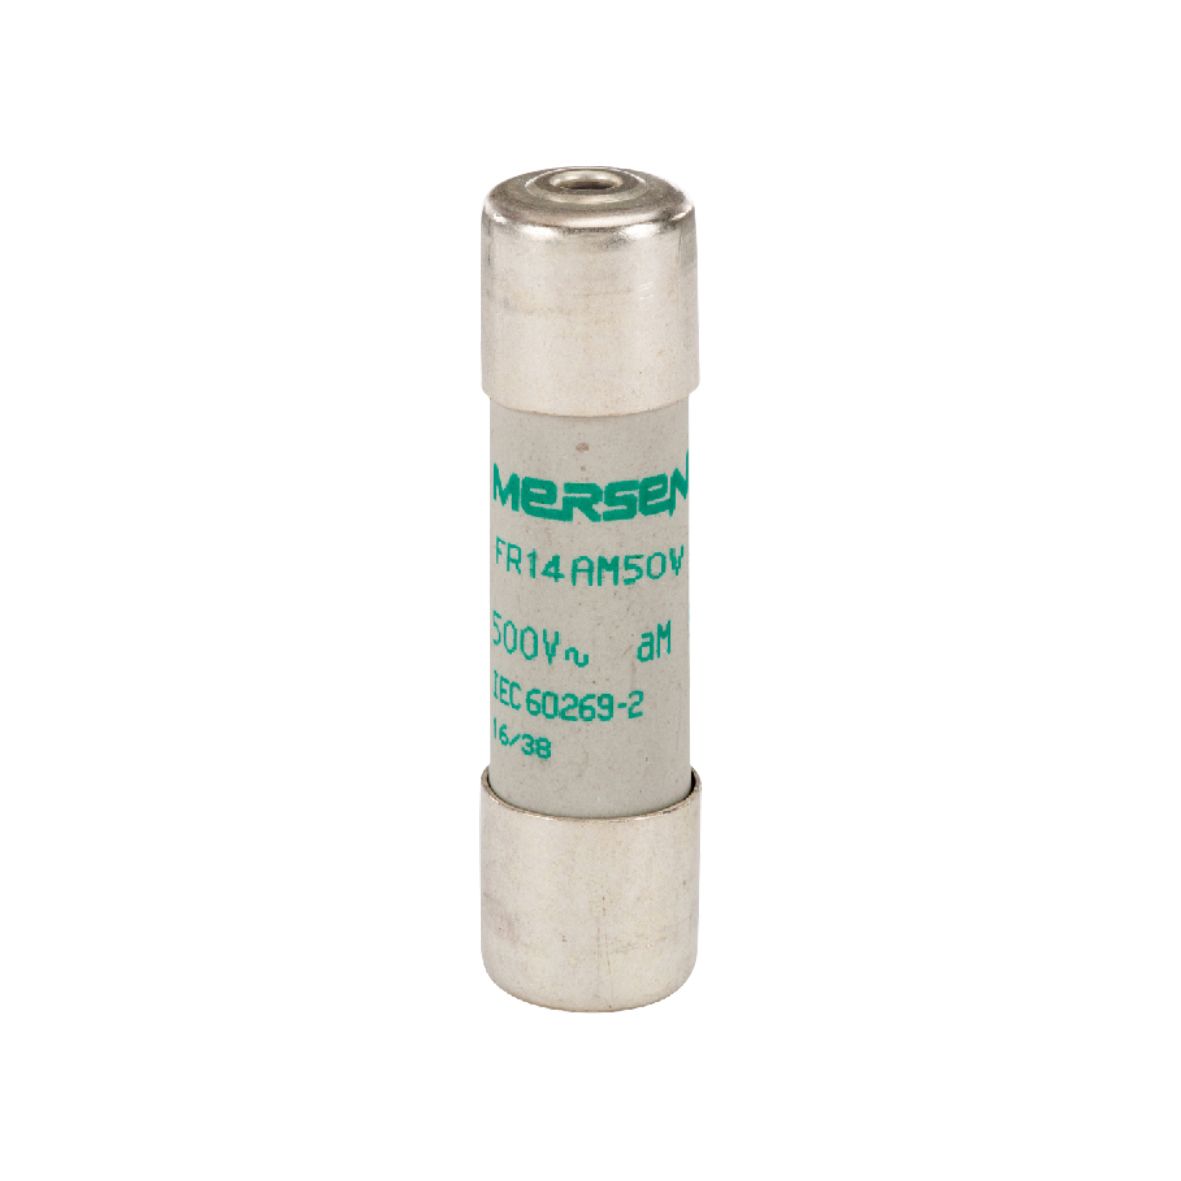 E219240 - Cylindrical fuse-link aM 500VAC 14.3x51, 6A with striker